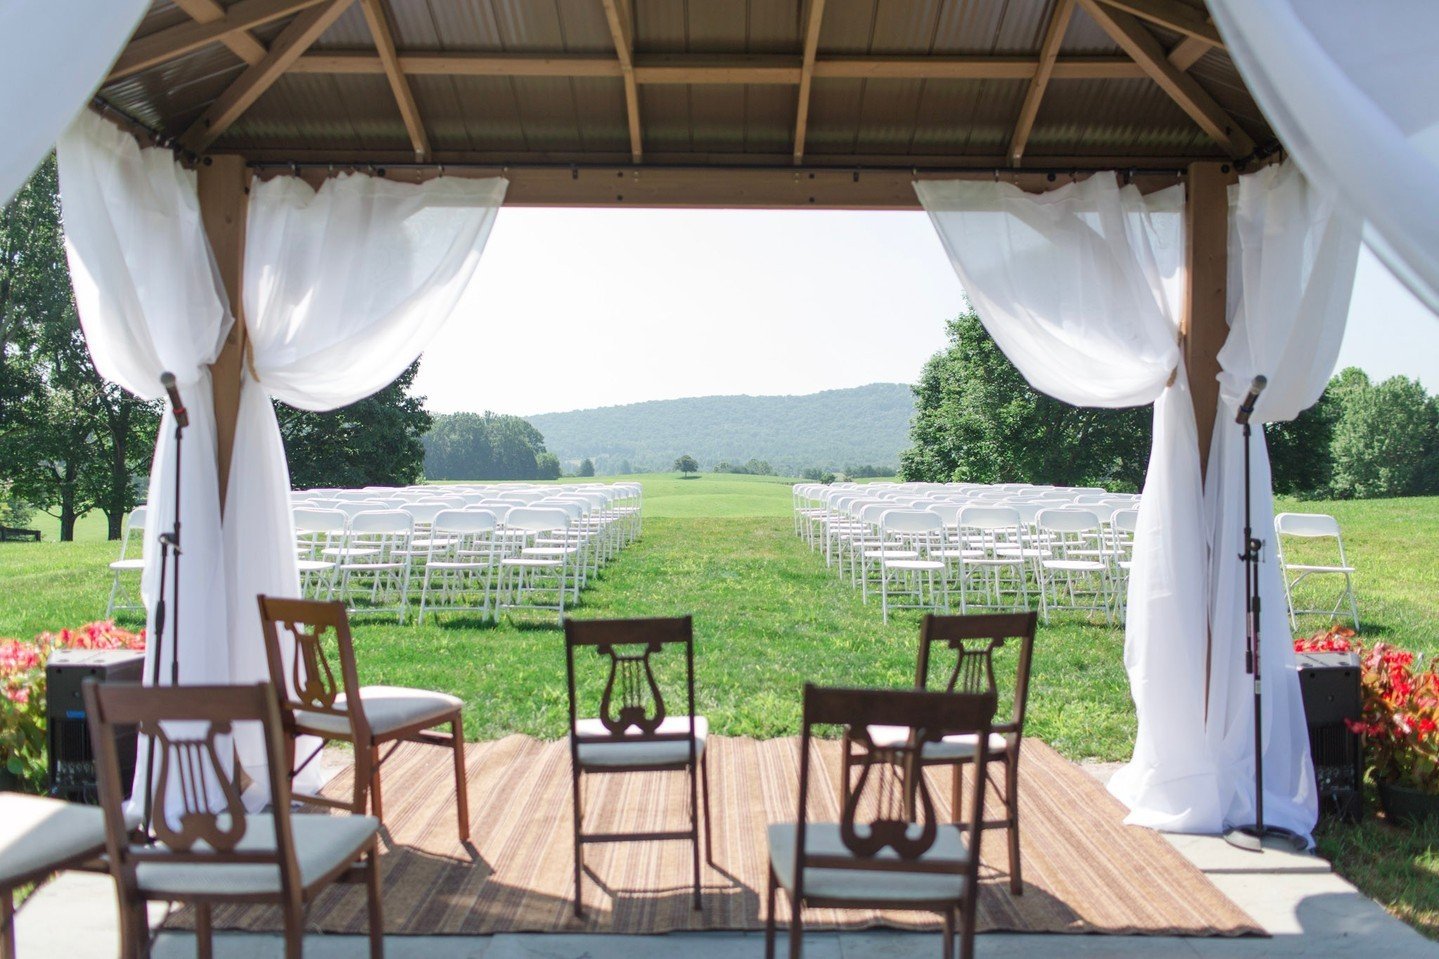 The Meadows at Castleton is only 60 miles from Washington, DC, but worlds away. Bucolic Rappahannock County is a gem of rolling hills, fresh air, country roads, and amazing views nestled up against the Shenandoah National Park. ⁠
⁠
Our beautiful prop